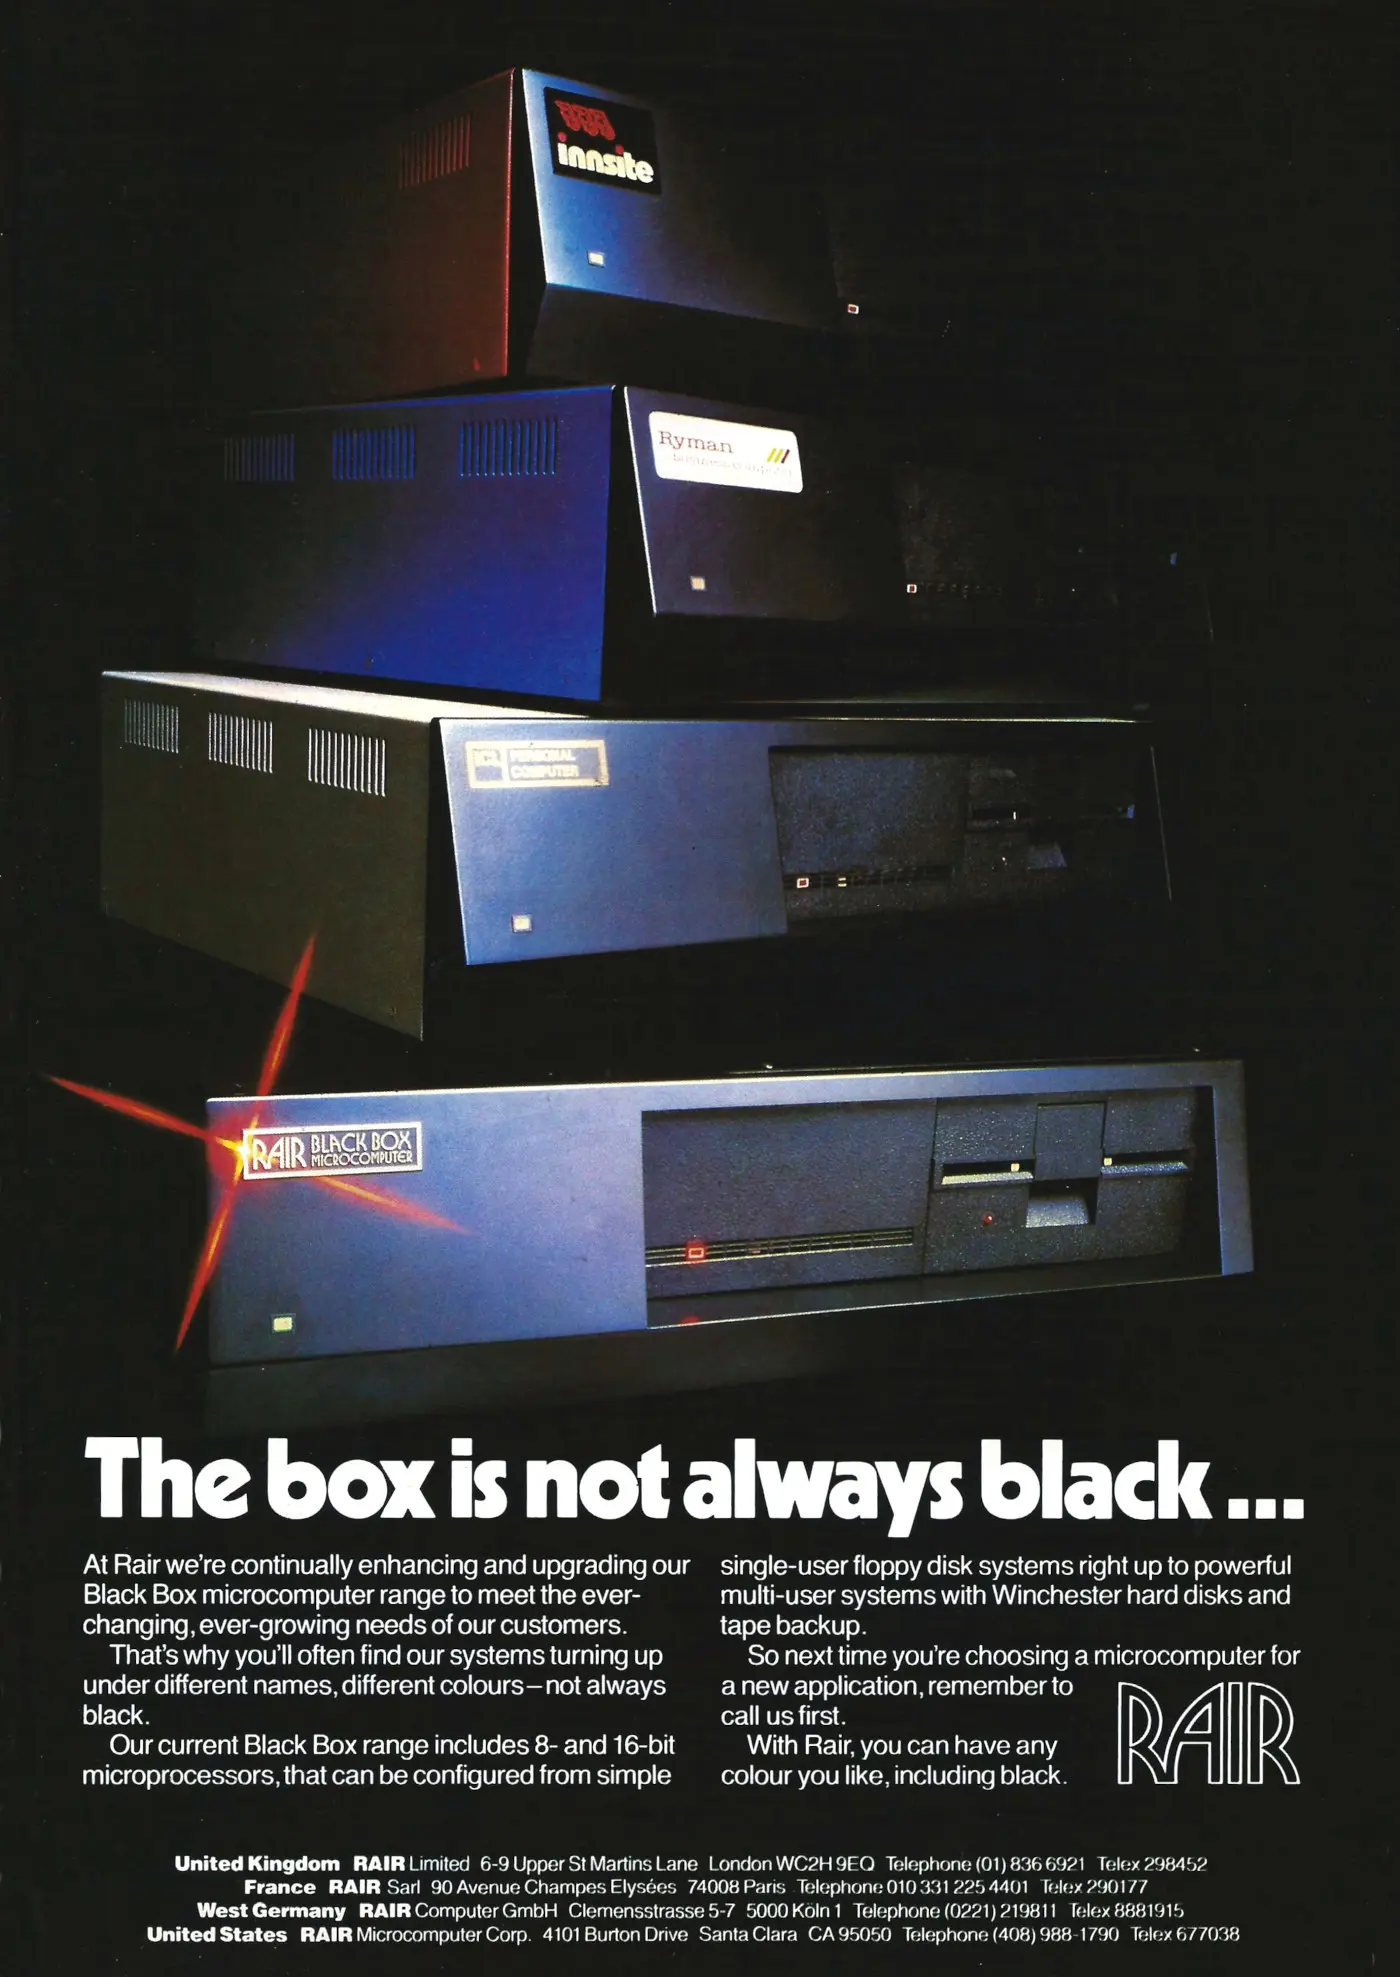 RAIR Advert: RAIR: The box is not always black, from Personal Computer World, March 1983